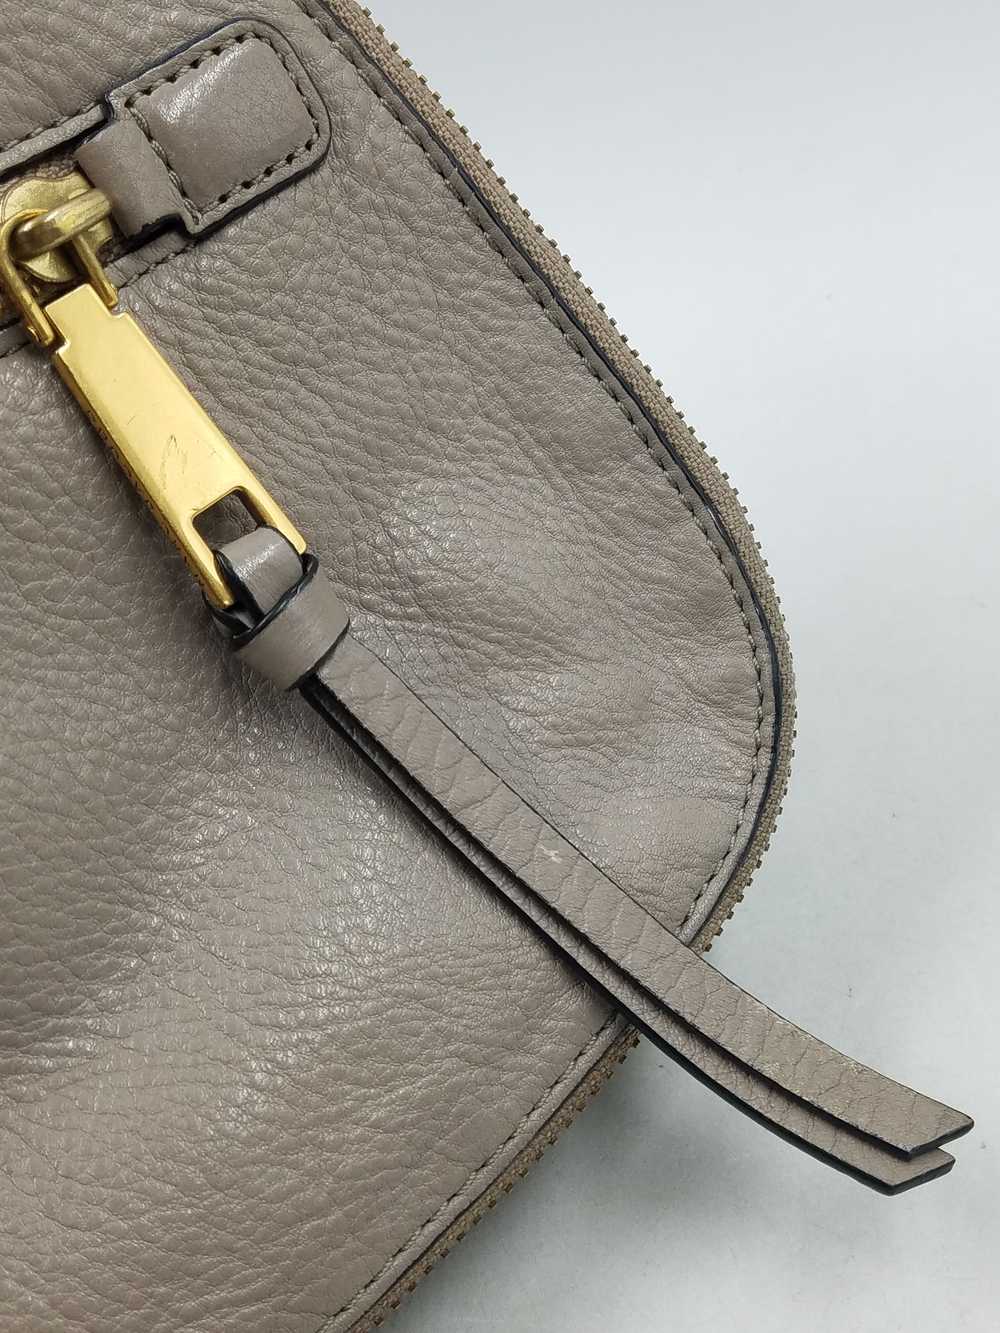 Authentic Marc Jacobs Taupe Saddle Bag - image 8